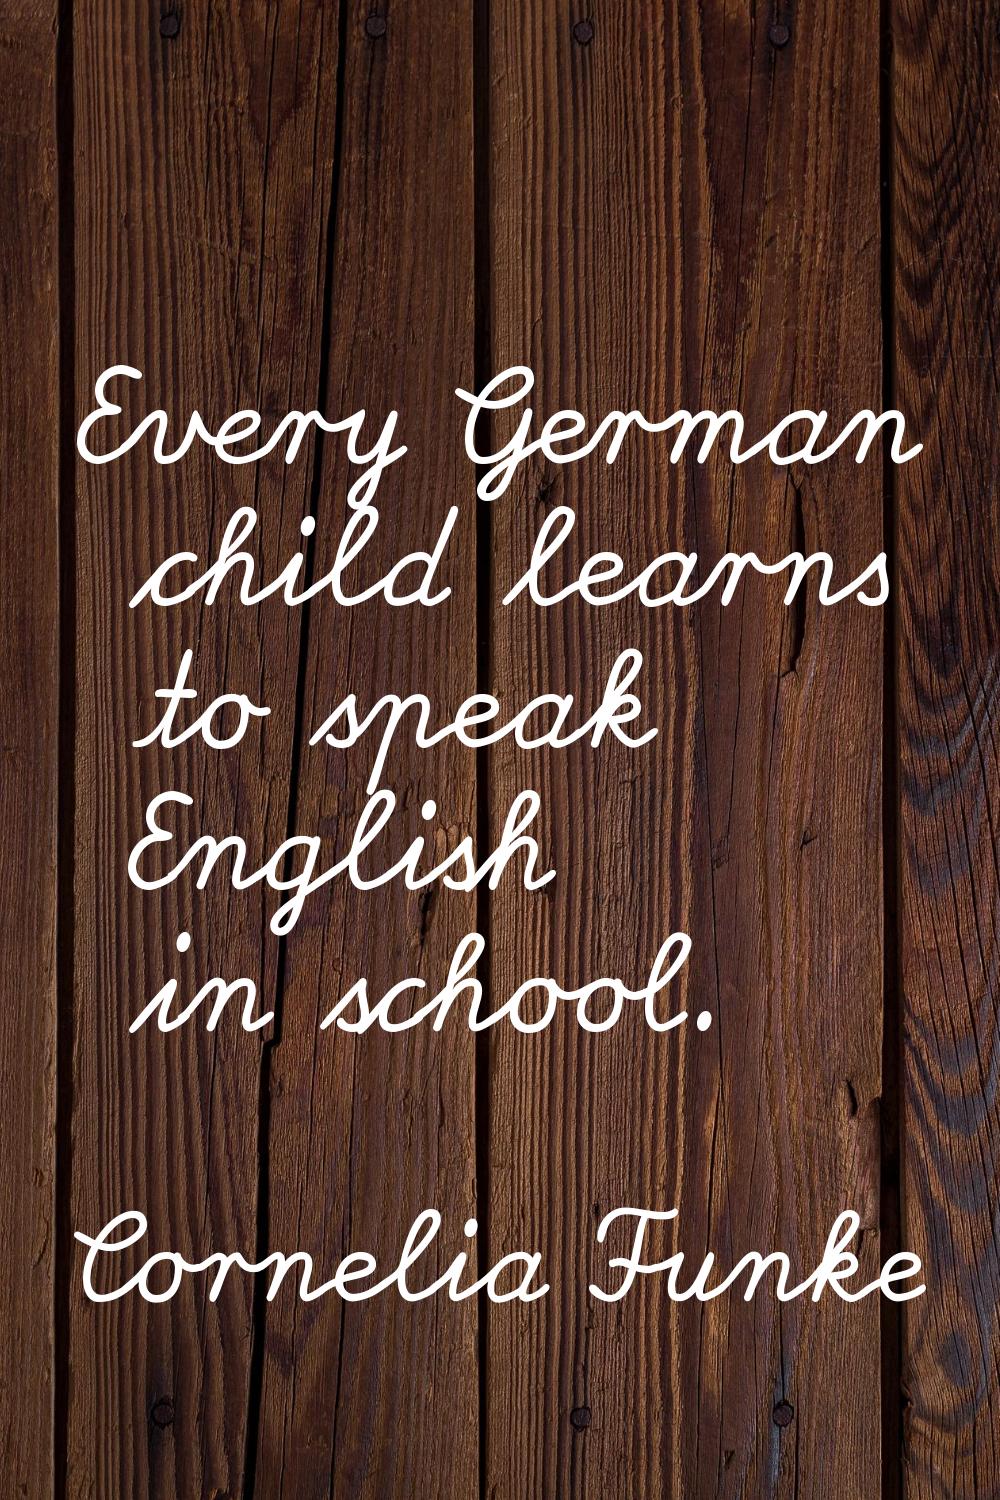 Every German child learns to speak English in school.